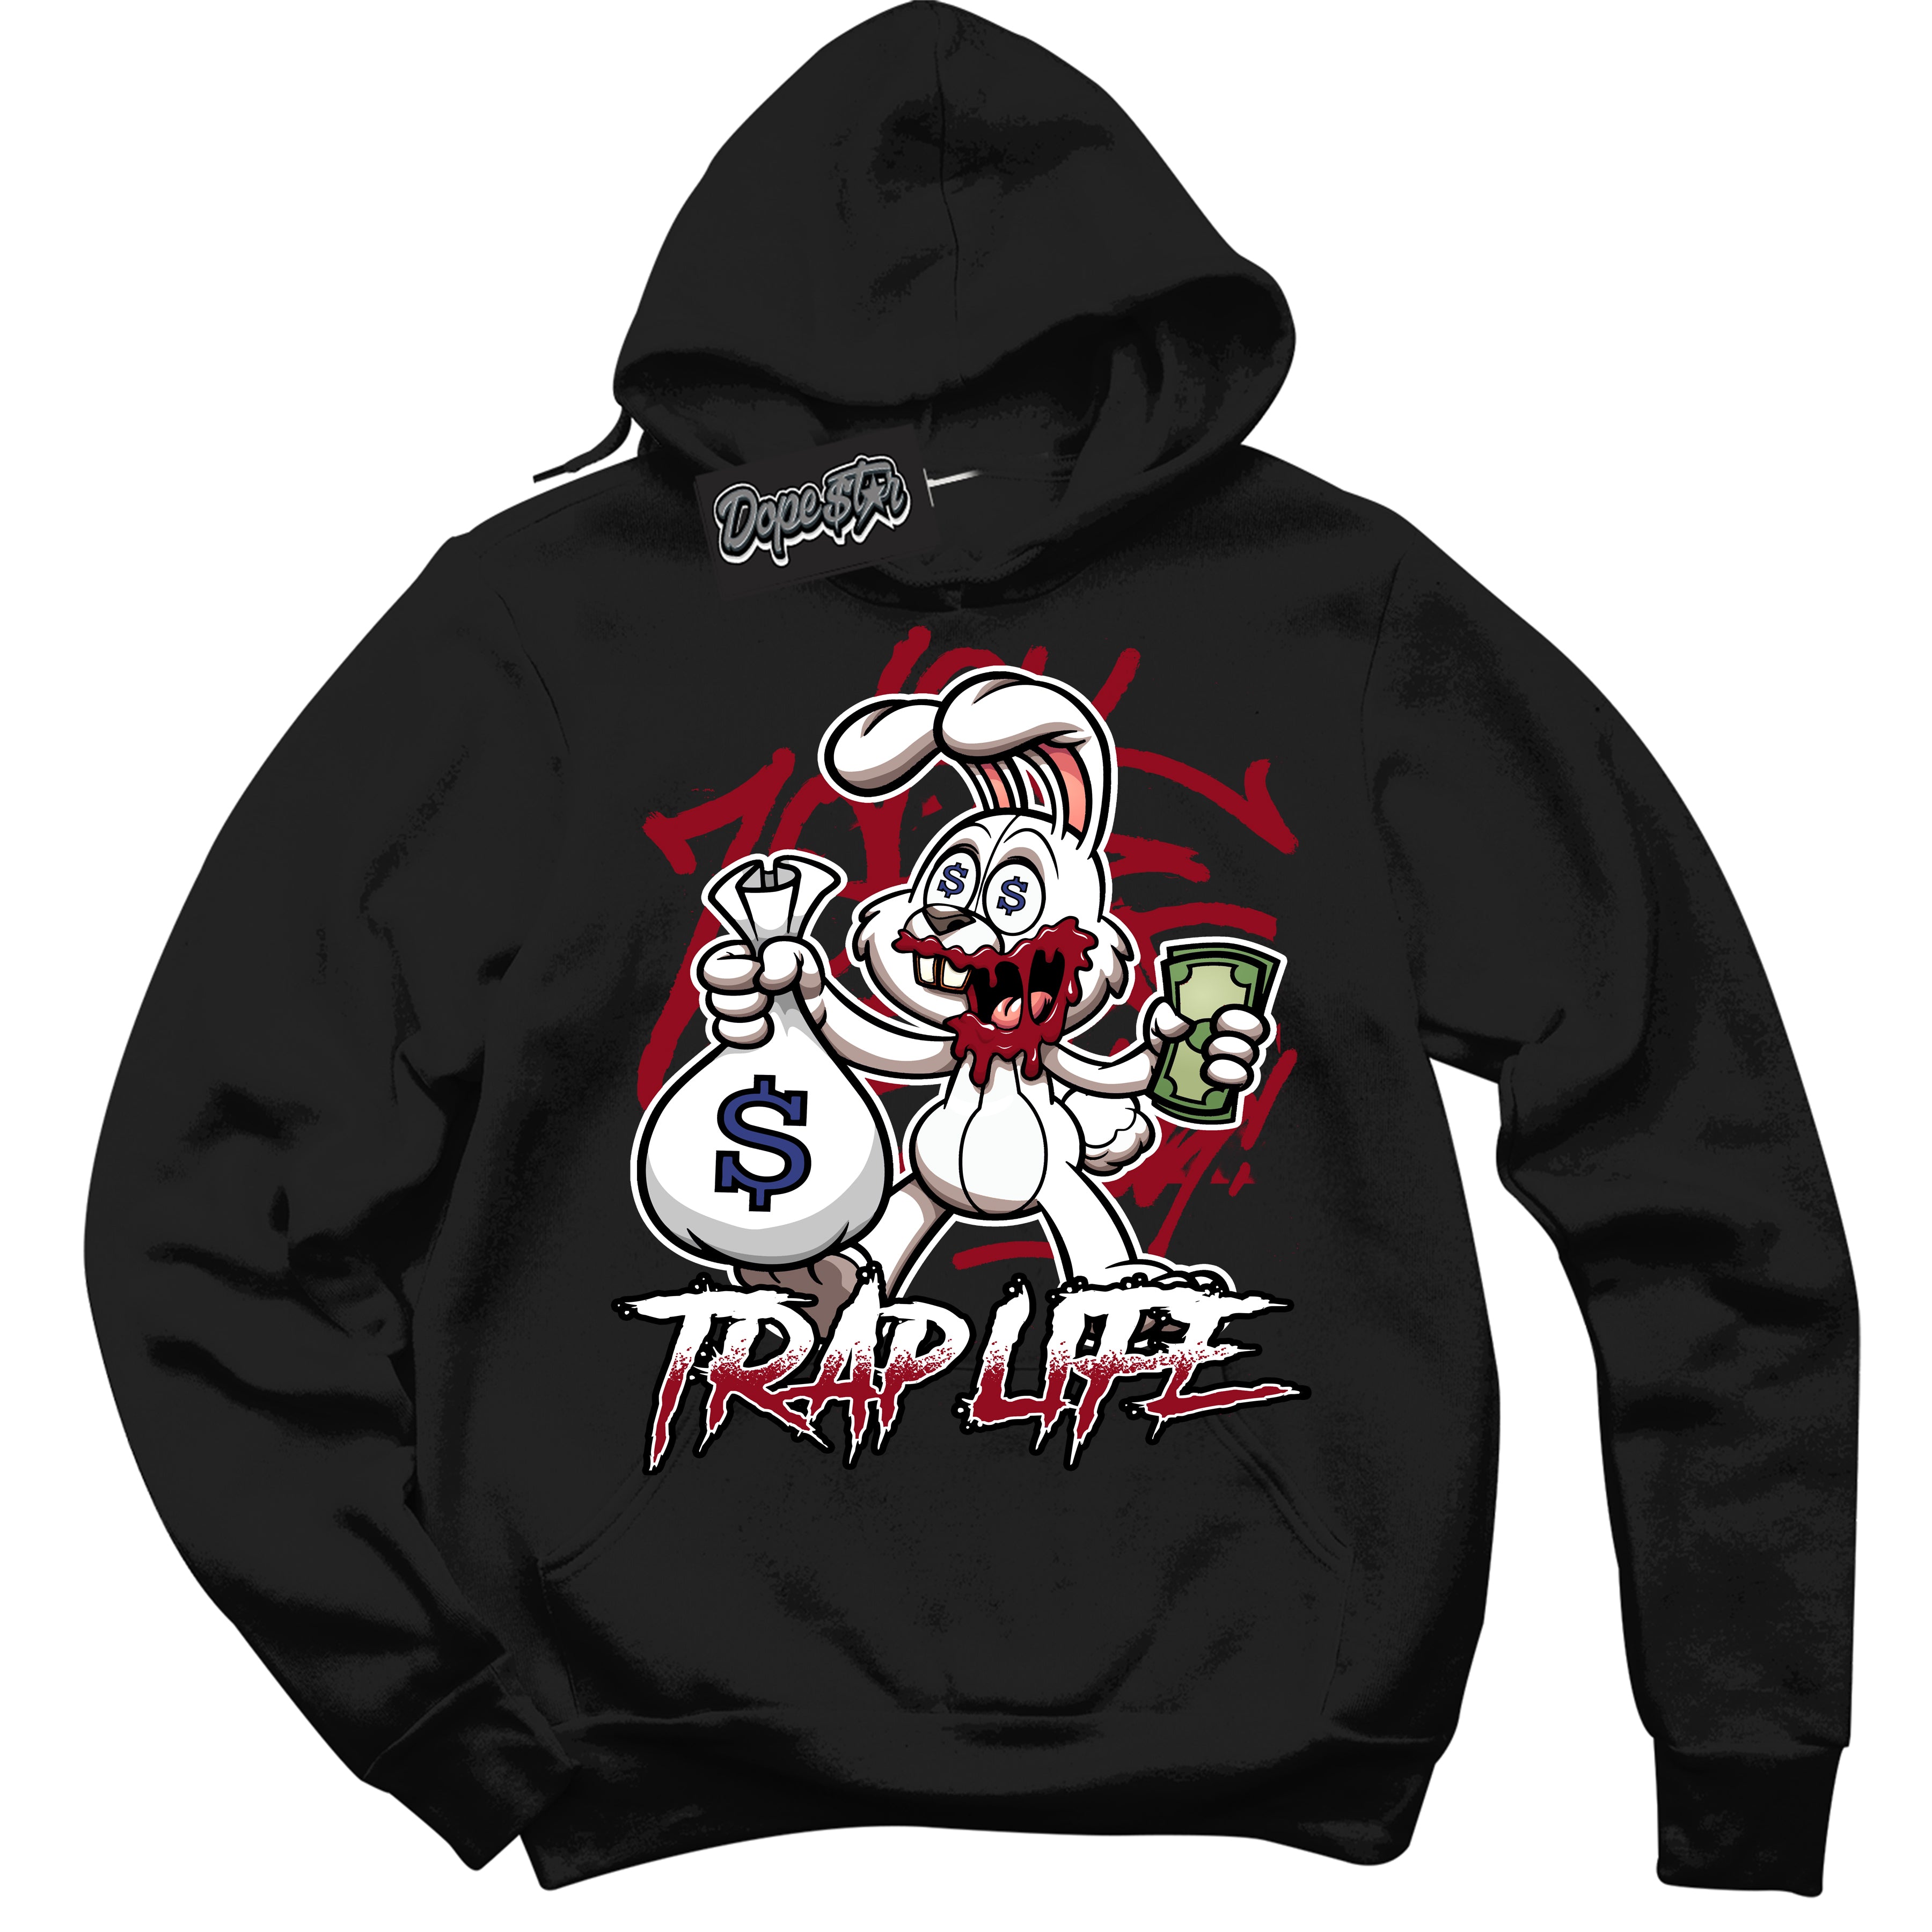 Cool Black Hoodie with “ Trap Rabbit ”  design that Perfectly Matches Playoffs 8s Sneakers.